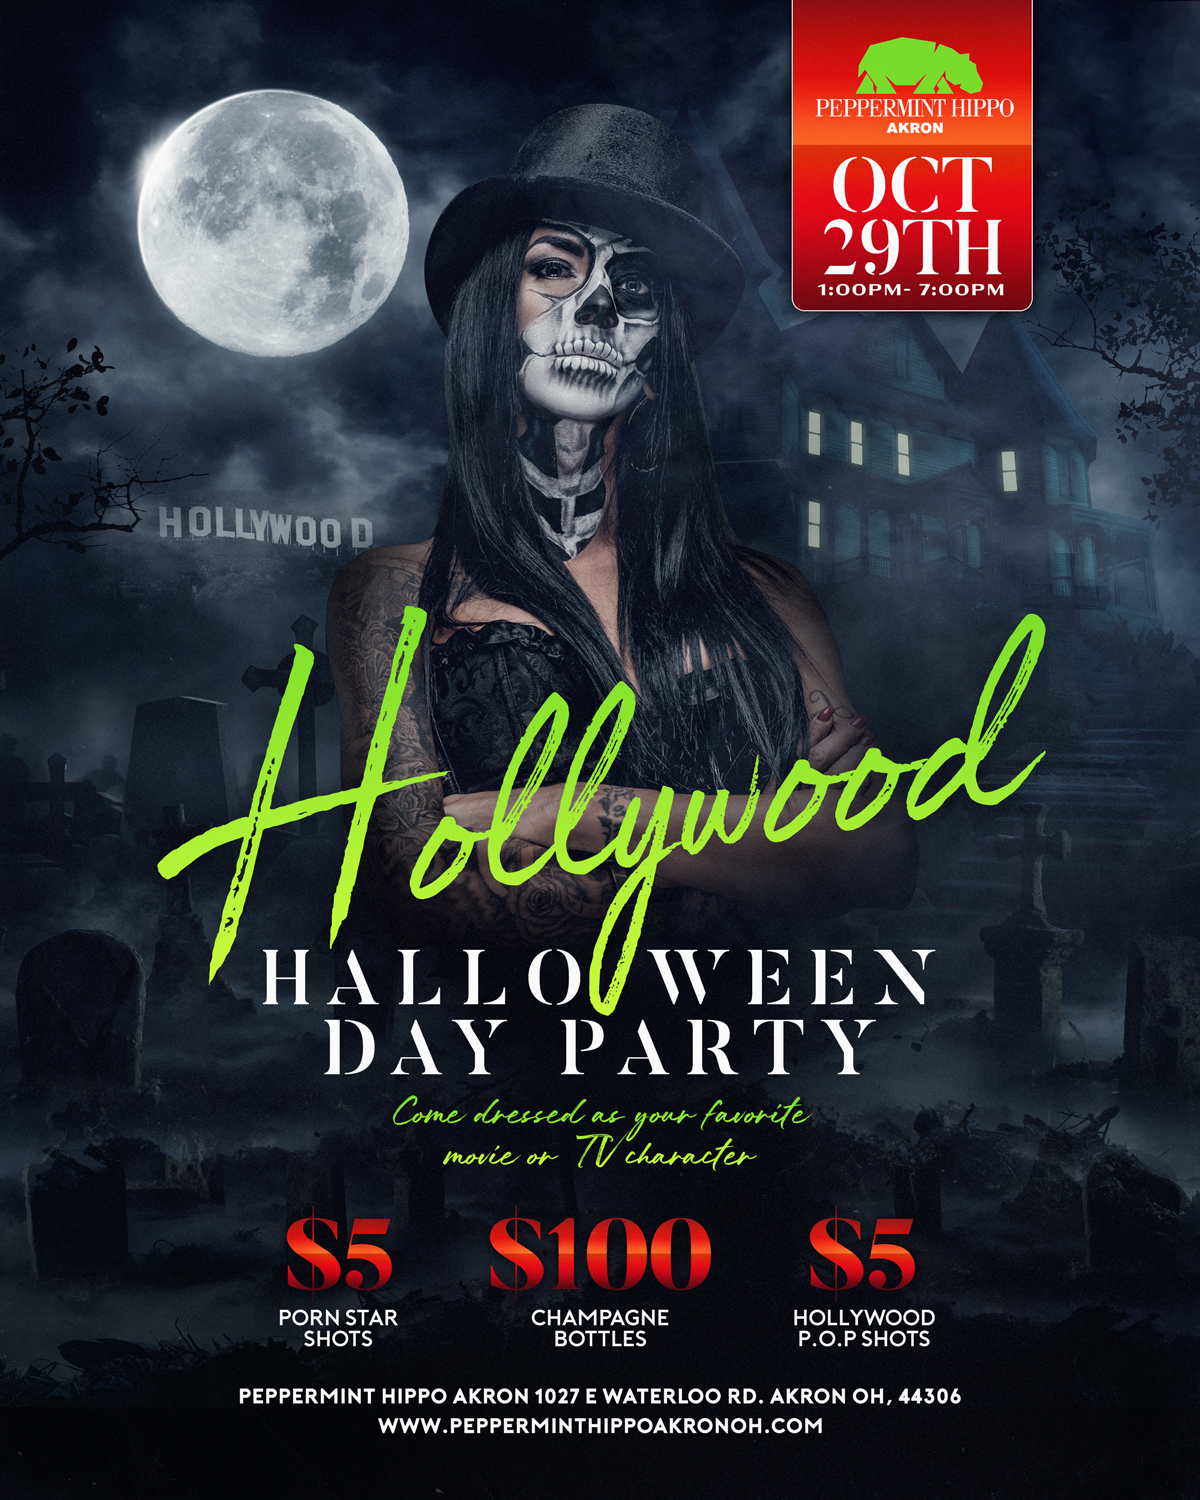 Hollywood Halloween Day Party